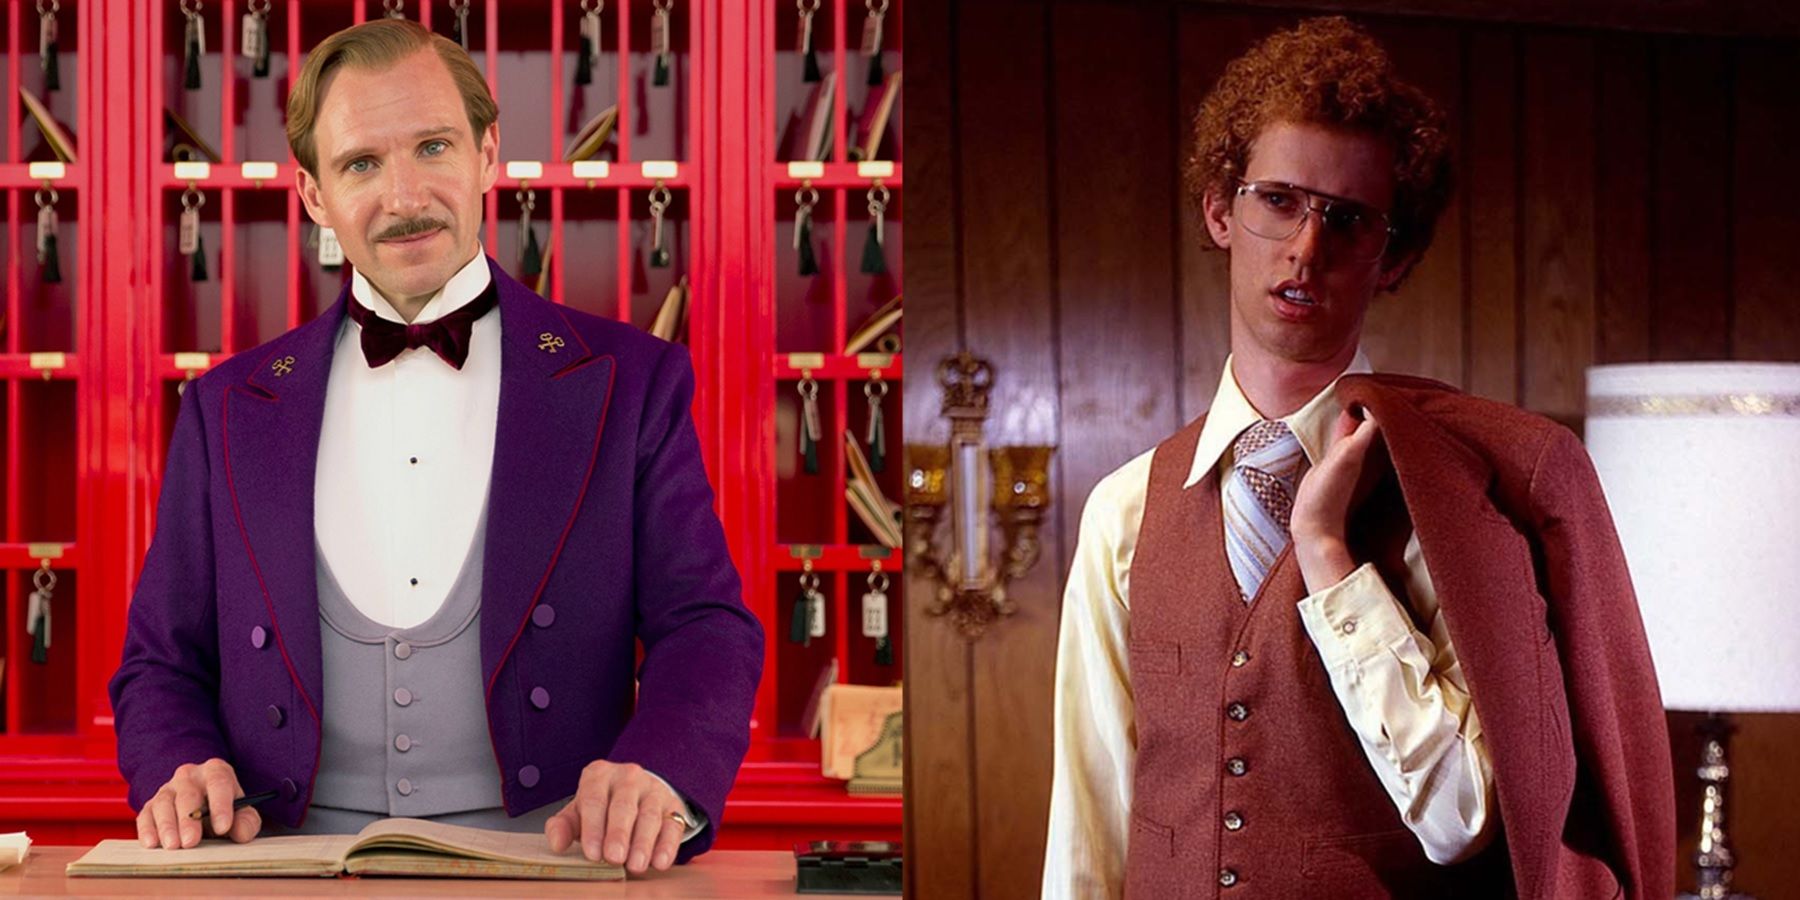 Ralph Fiennes in The Grand Budapest Hotel and Jon Heder in Napoleon Dynamite